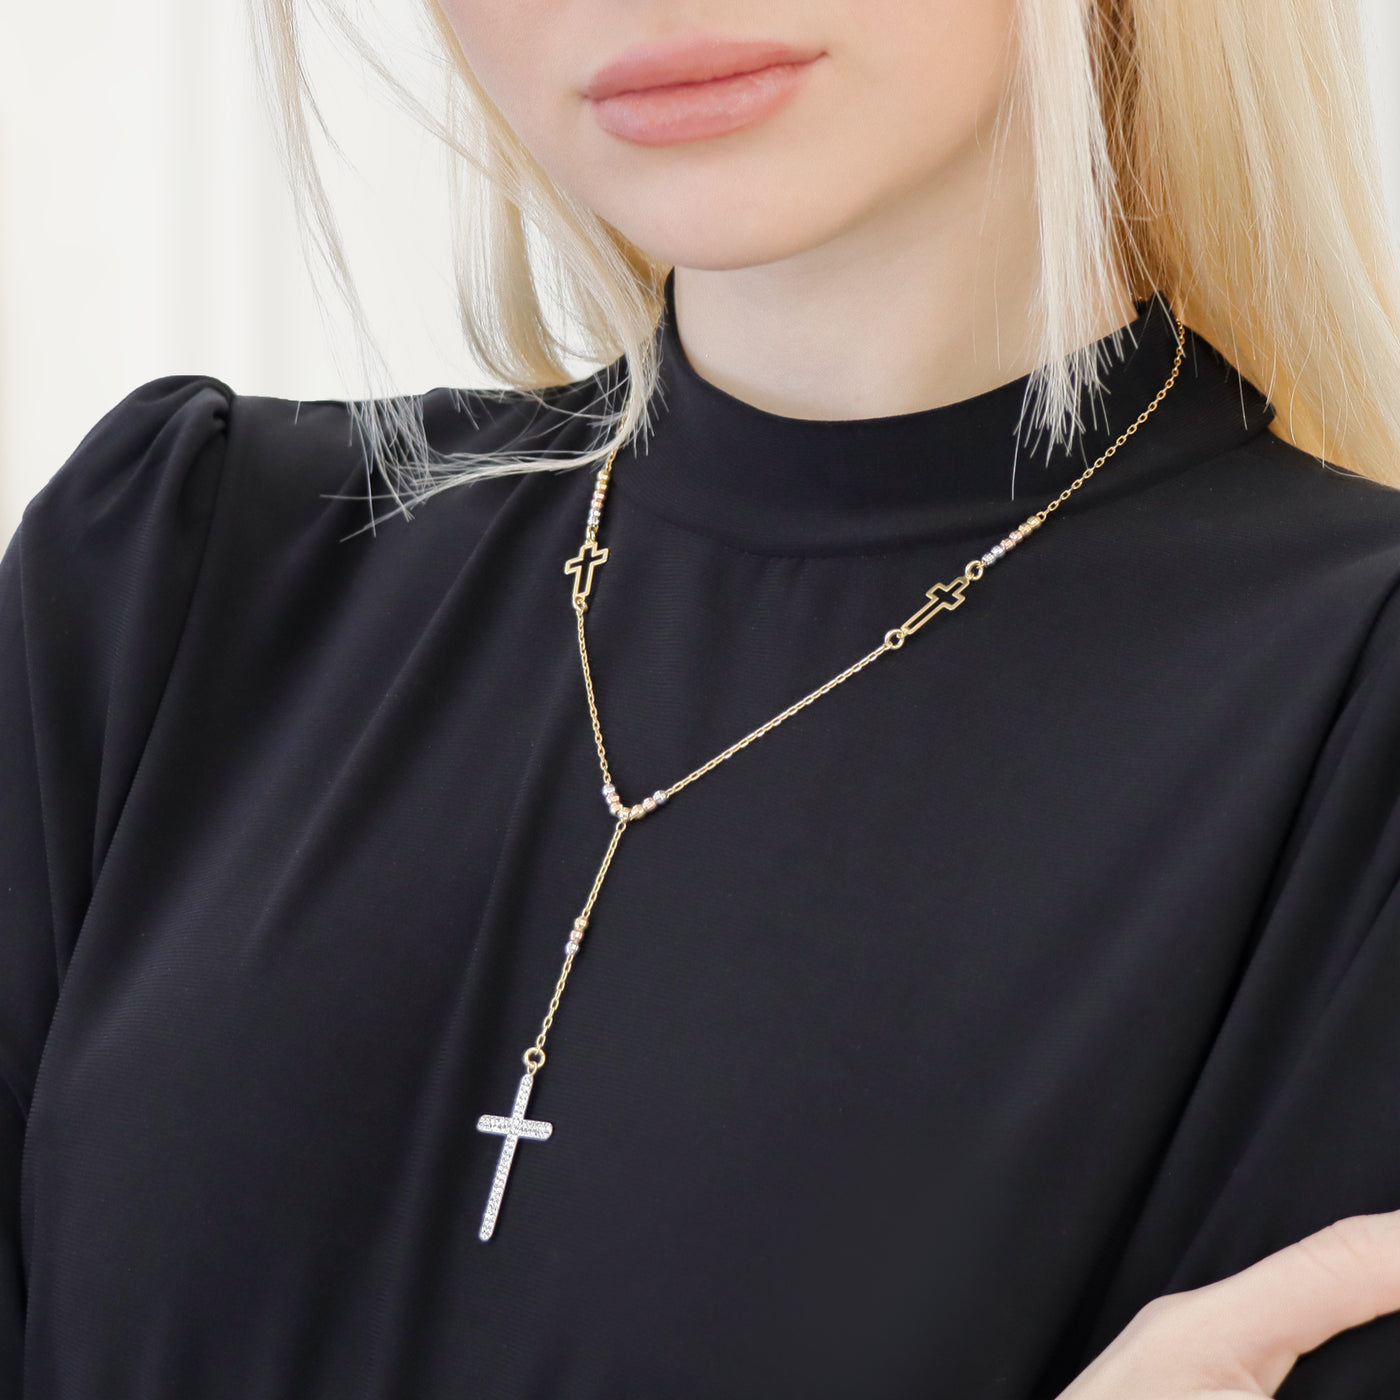 "The Miriam Miracle" Cross Necklace